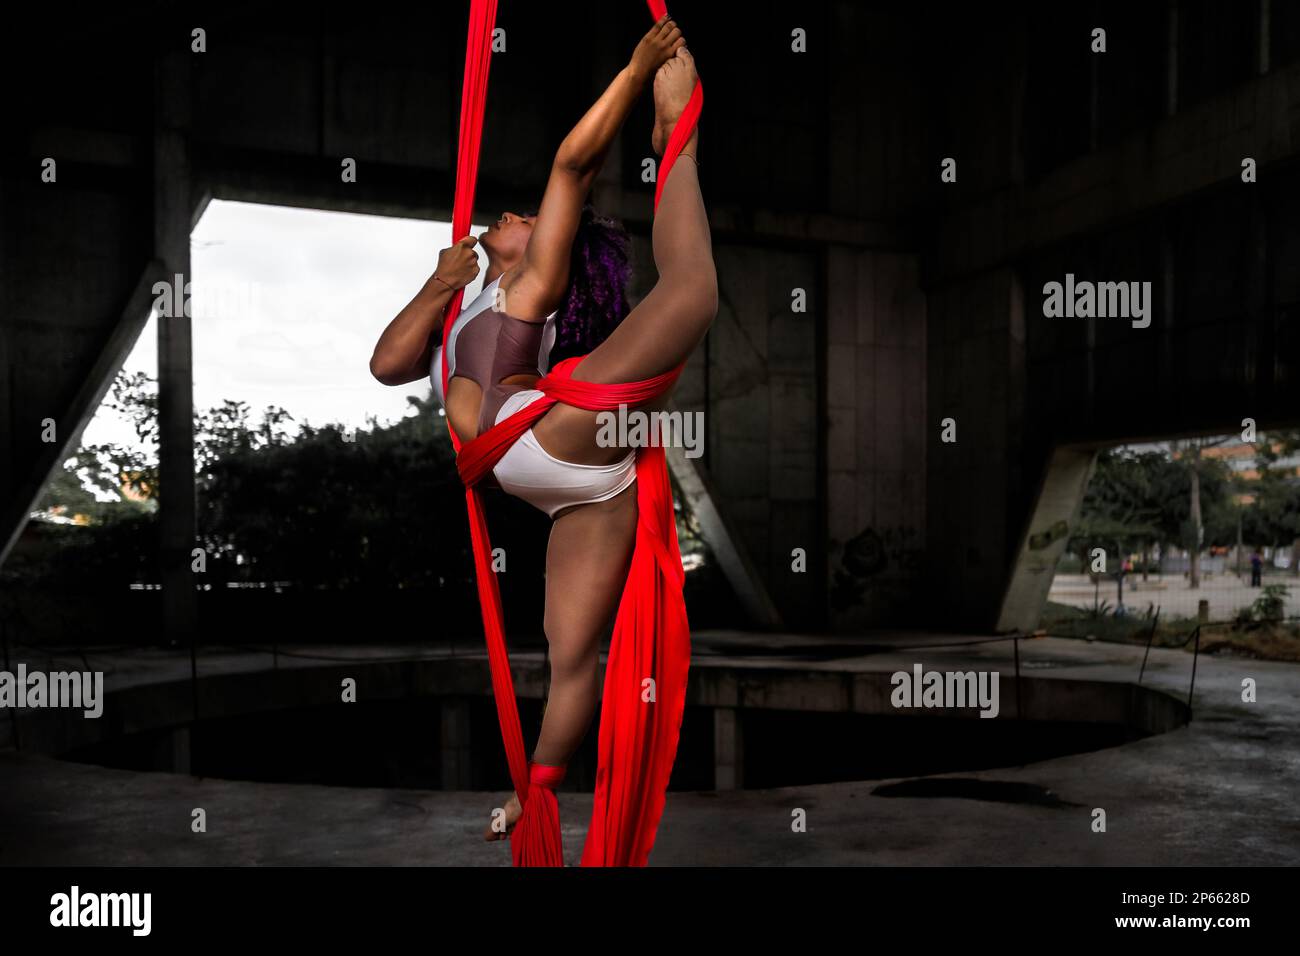 Mariale Contreras, a Venezuelan aerial dancer, performs on aerial silks during an art performance in an industrial space in Barranquilla, Colombia. Stock Photo